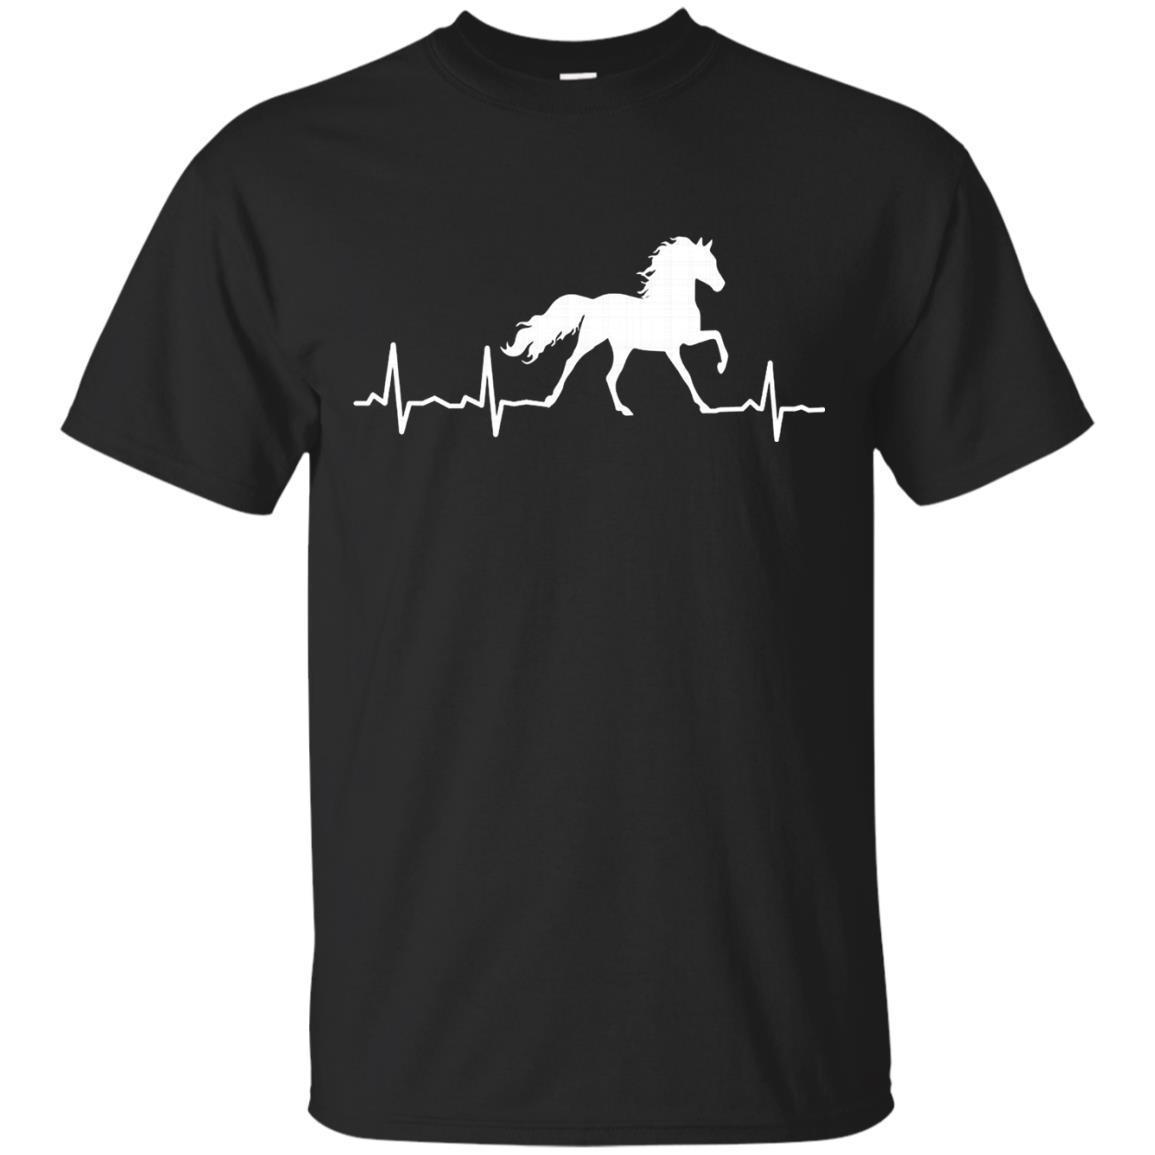 Horse Heartbeat T-shirt For Horse Riding Lovers